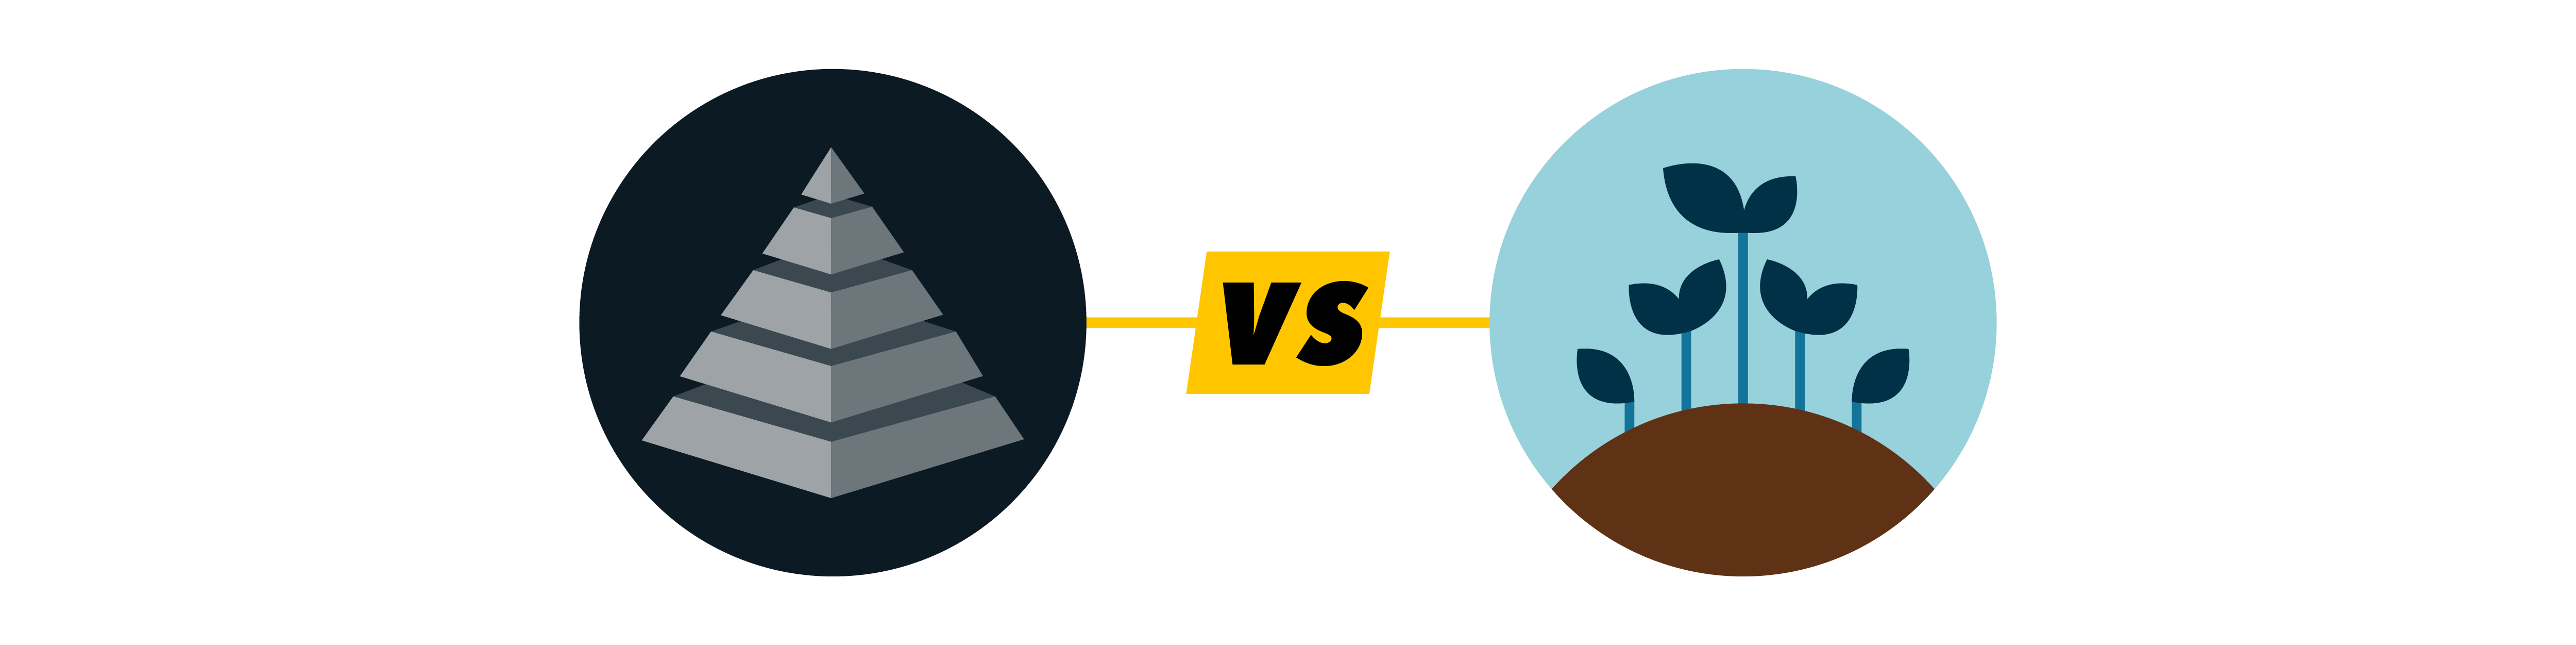 An icon of a grey pyramid in a black circle versus organic seedlings sprouting from the earth in a light blue circle